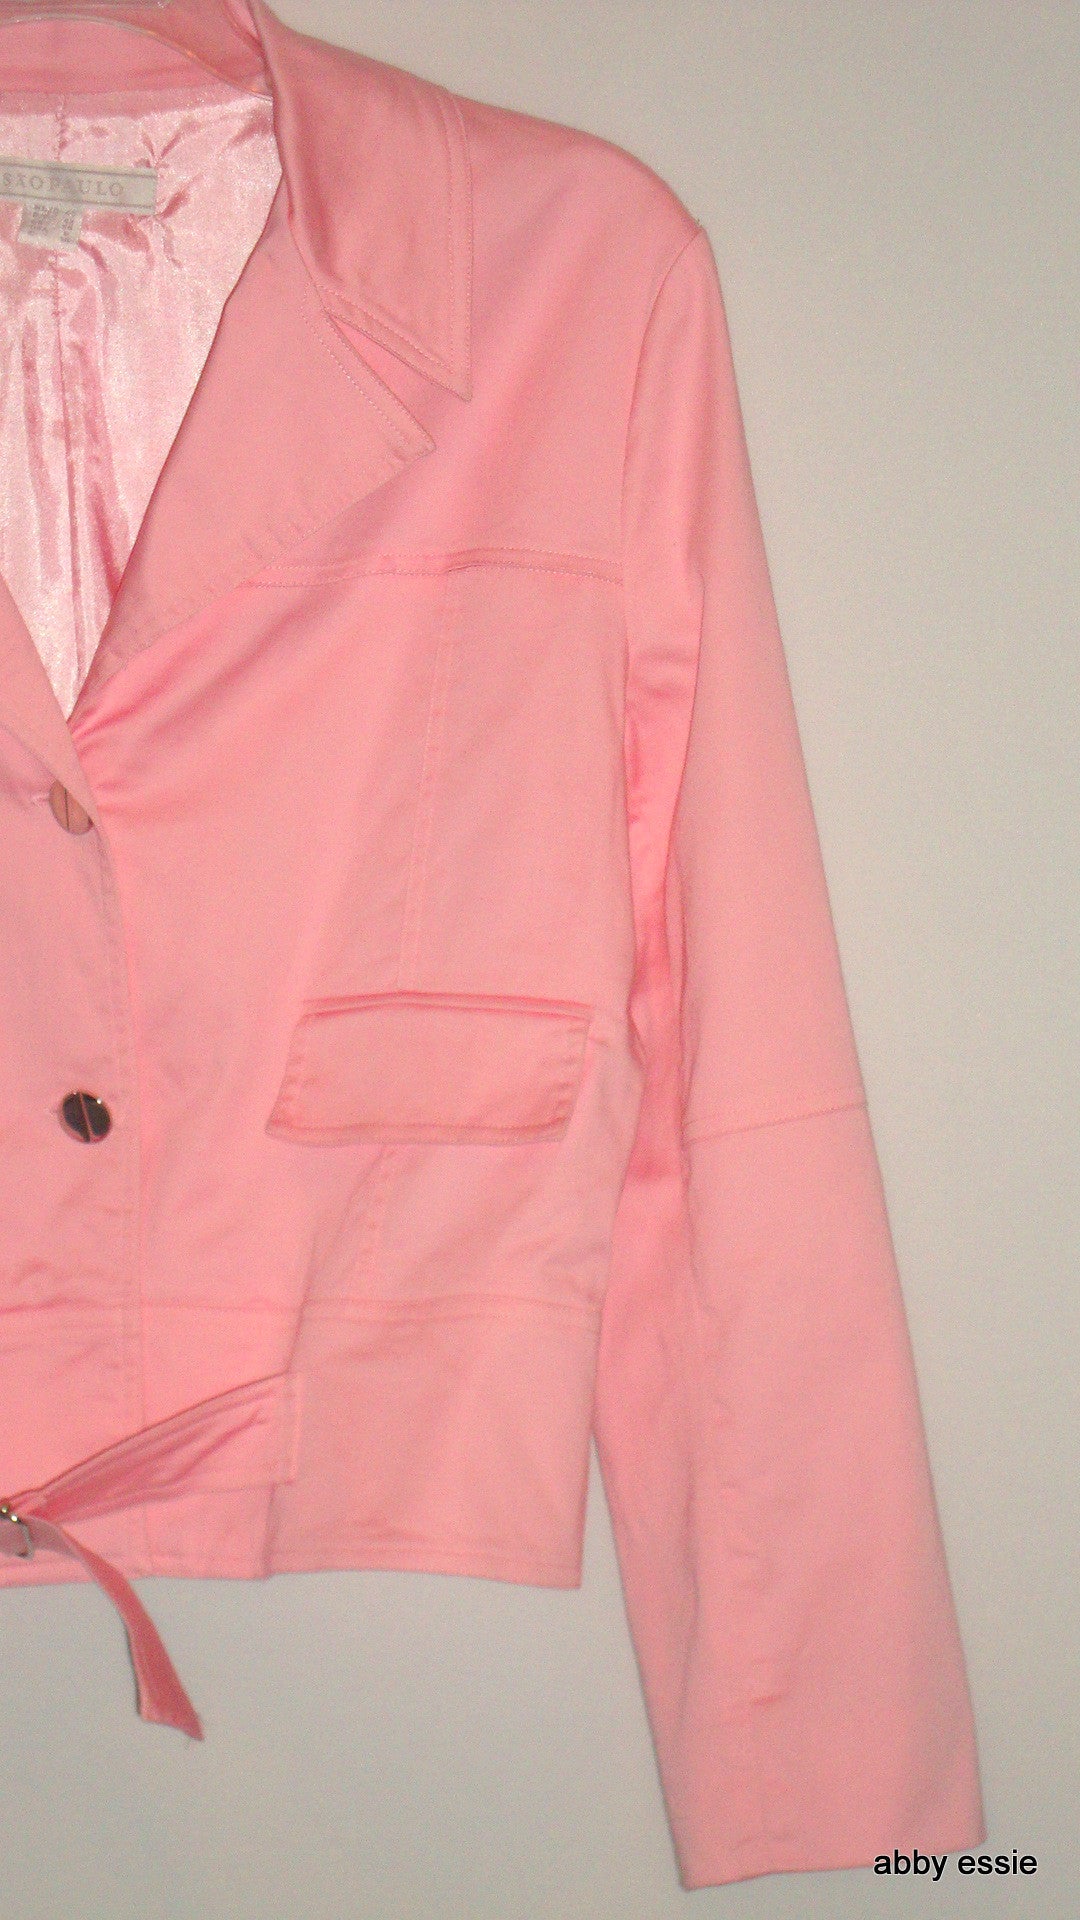 PINK COTTON SATEEN BELTED BLAZER CRUISE VACATION CAPE COD 4